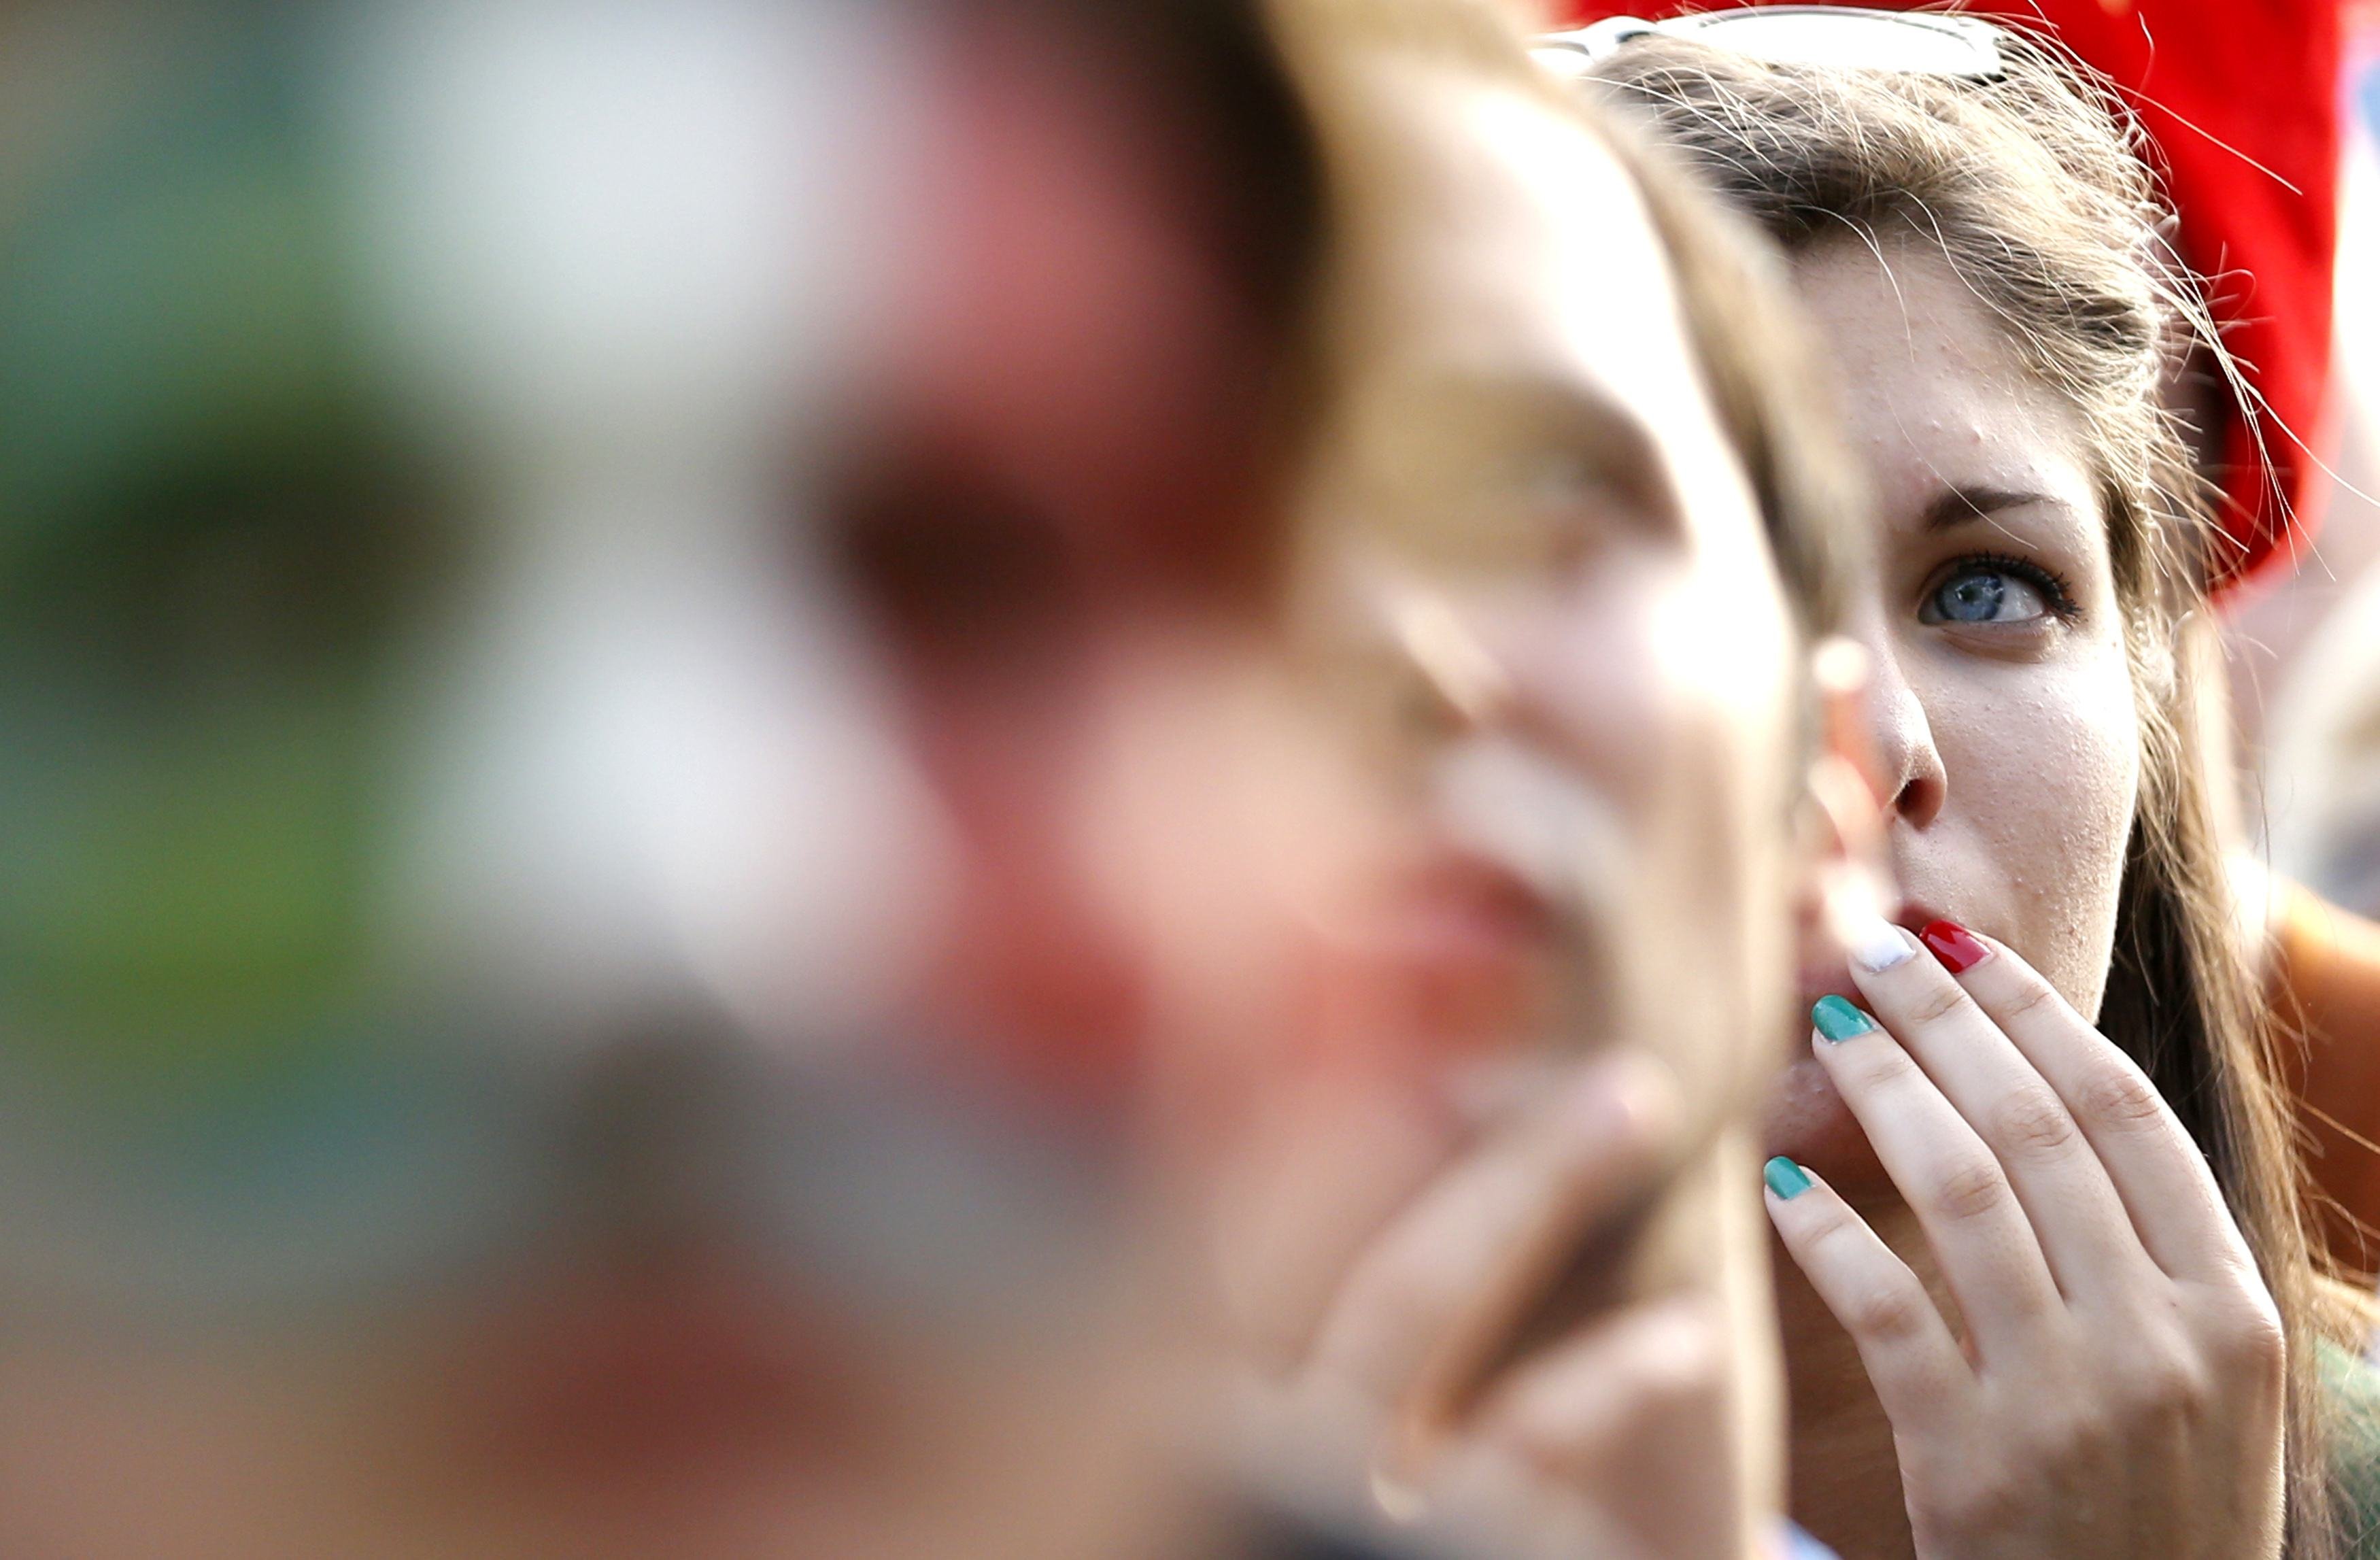 A fan reacts as she watches the match between Italy and Uruguay, in Rome on June 24, 2014.